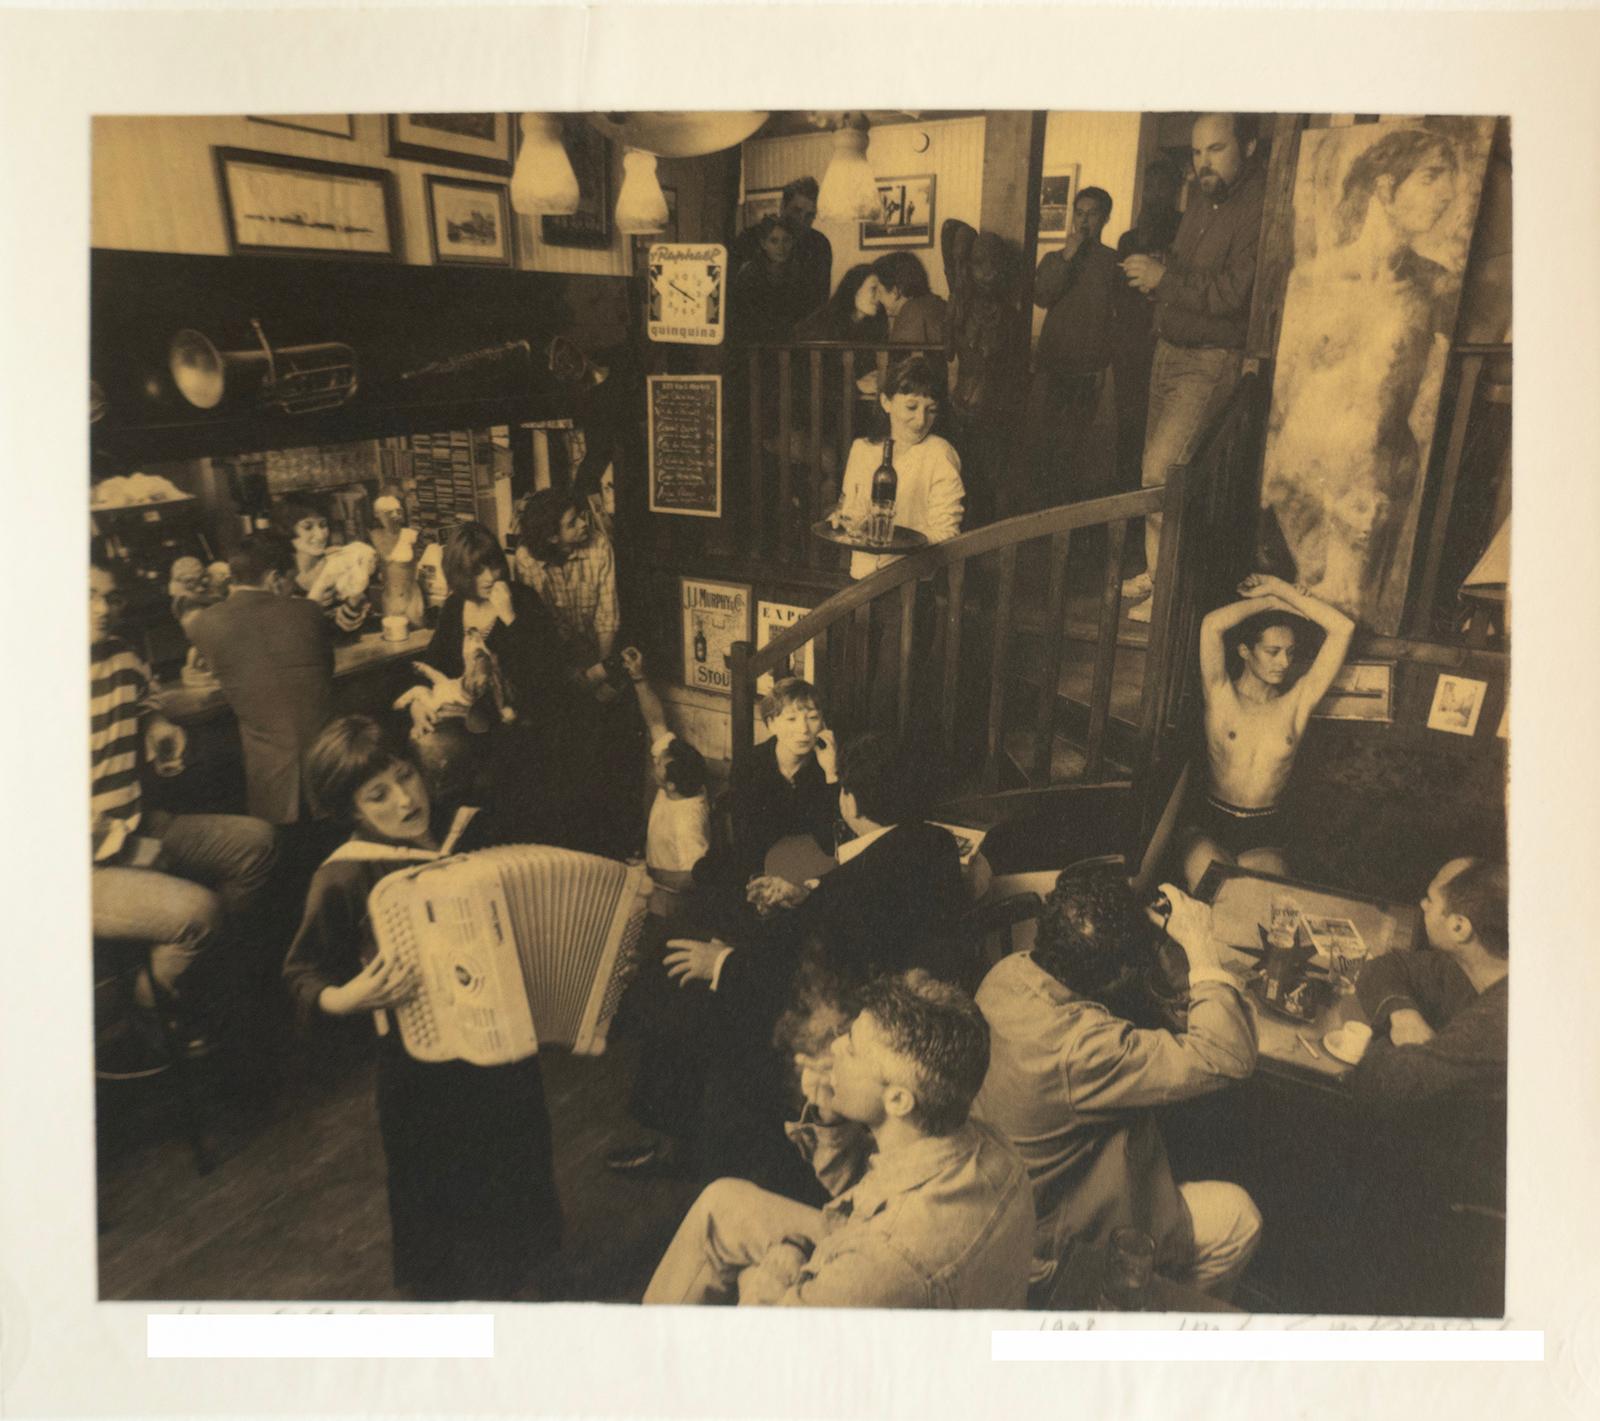 Elsa Poppin  -    Platinum Palladium print over 24 carat Gold leaf on vellum paper
Edition 1 of 8 , plus 2 AP ( Large size, size 2 )
Still life scene of the regulars at a vintage bar called Elsa Poppin in Rennes, Brittany, France

Signed + numbered